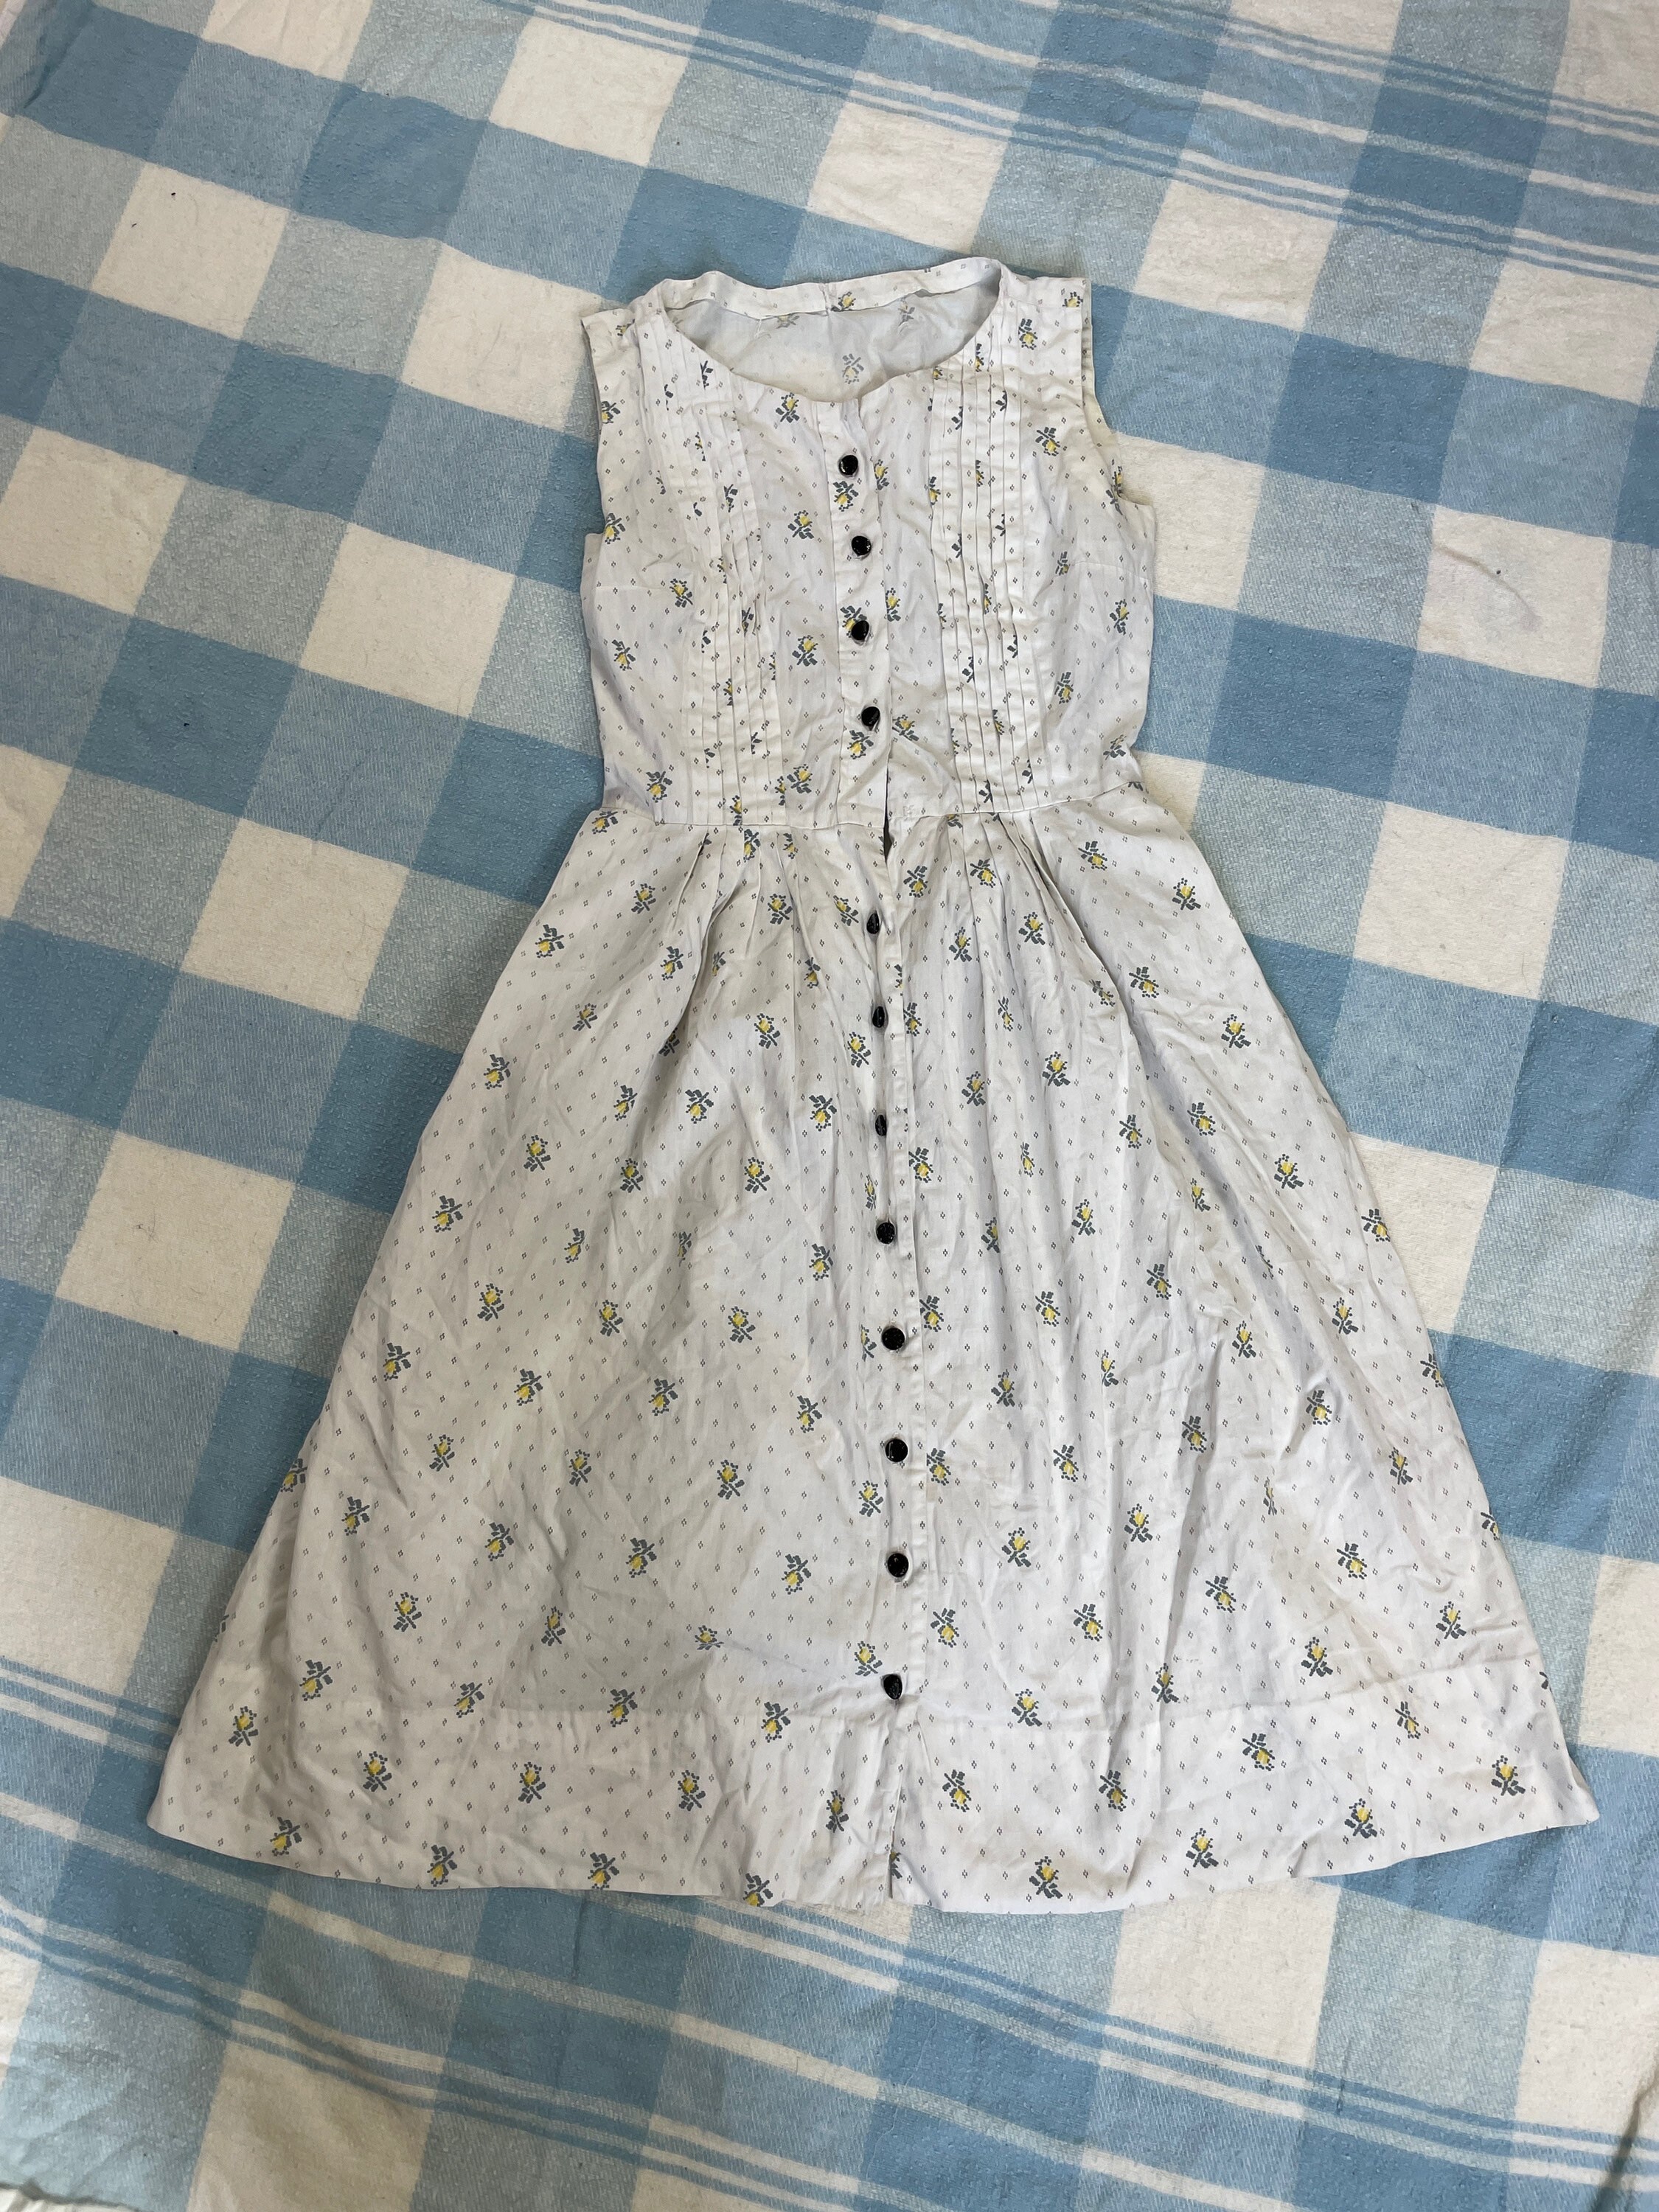 Vintage 1940s-50s Cotton Feedsack House Dress With Pockets - Etsy